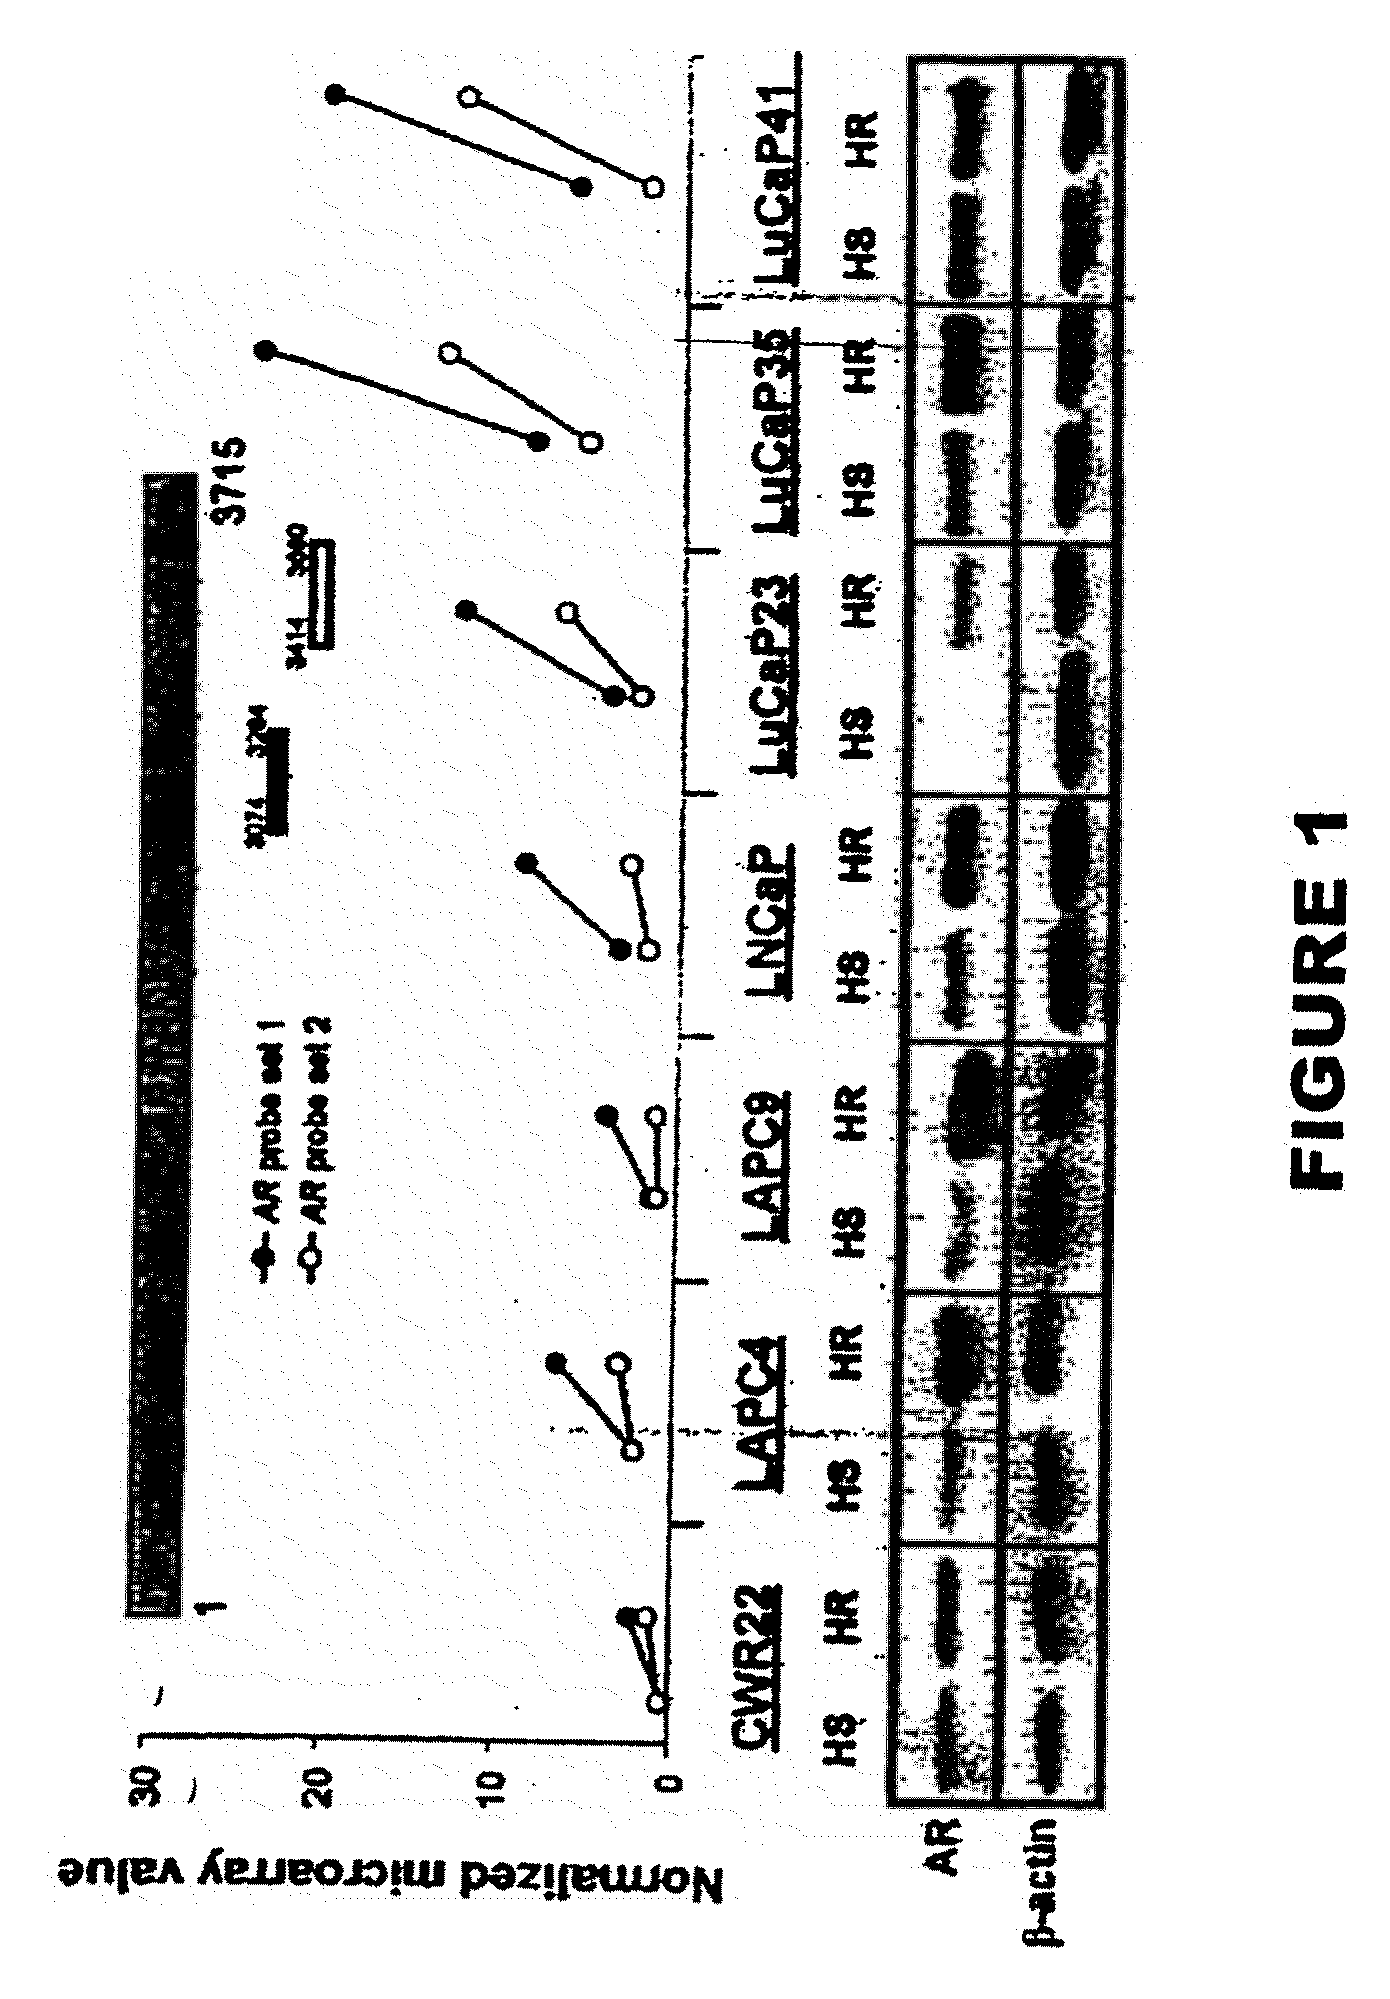 Methods and materials for assessing prostate cancer therapies and compounds